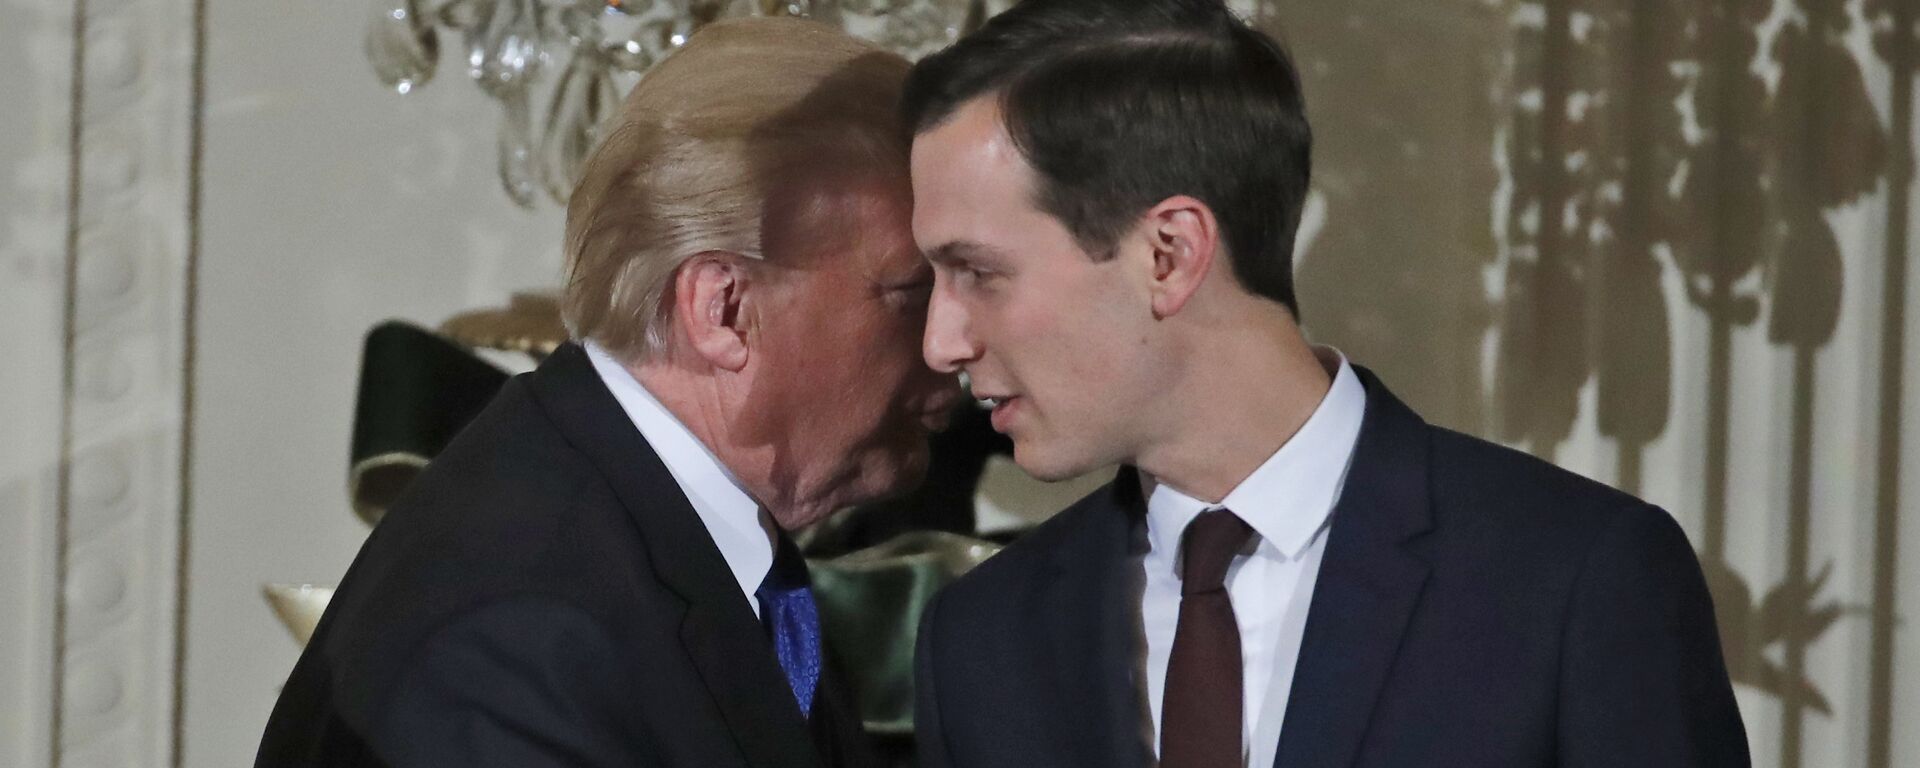 In this Thursday, Dec. 7, 2017, file photo, U.S. President Donald Trump speaks with White House Senior Adviser Jared Kushner as he departs after a reception in the East Room of the White House, in Washington - Sputnik International, 1920, 14.08.2022